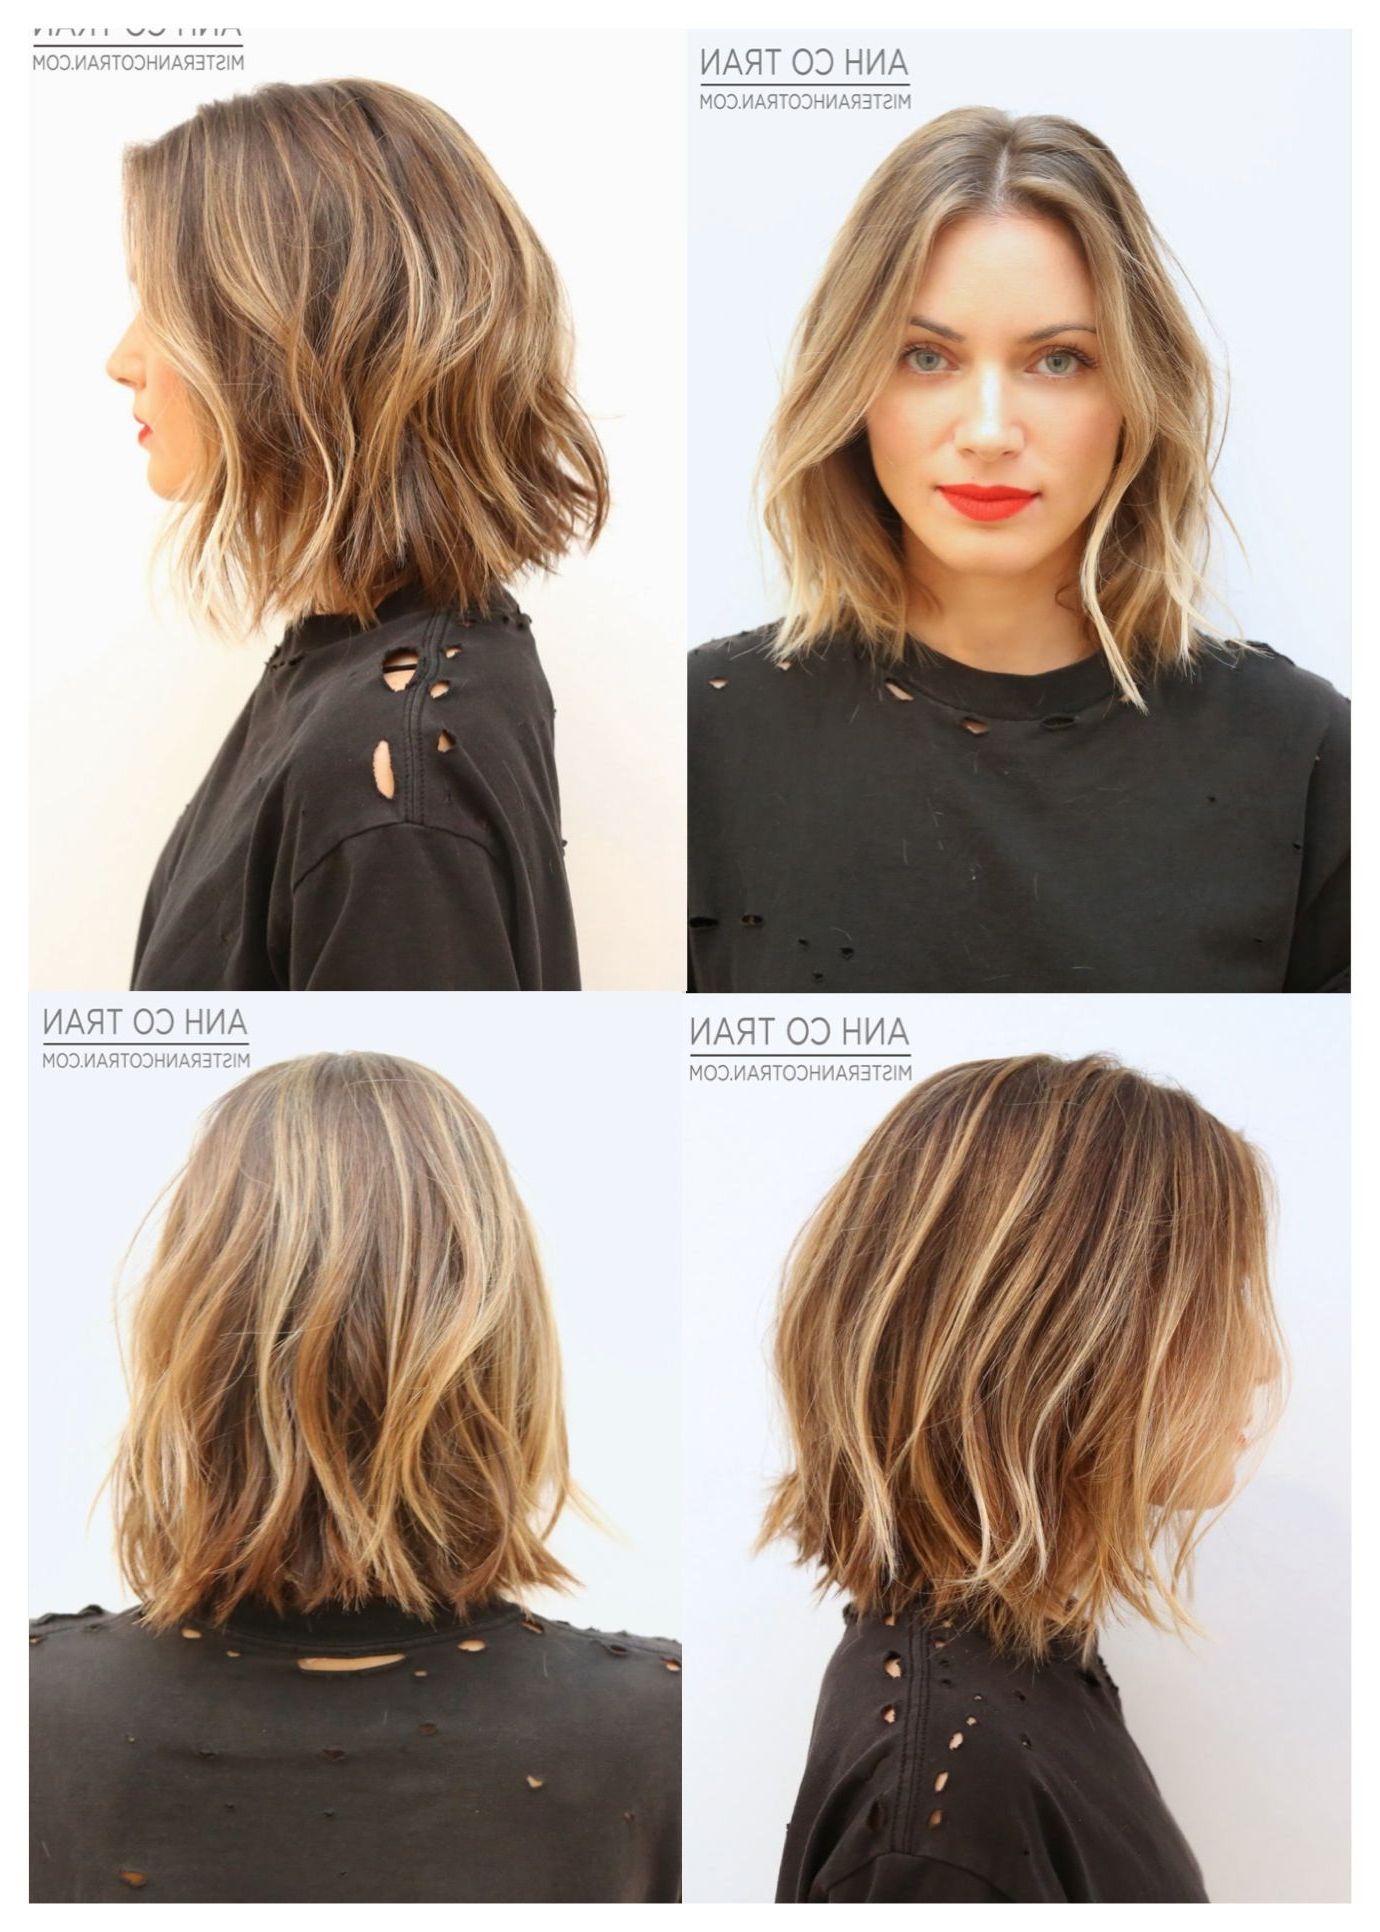 Short Tousled Hair. Most Like My Hair Texture, But I Want A Longer Regarding Sexy Tousled Wavy Bob For Brunettes (Photo 10 of 25)